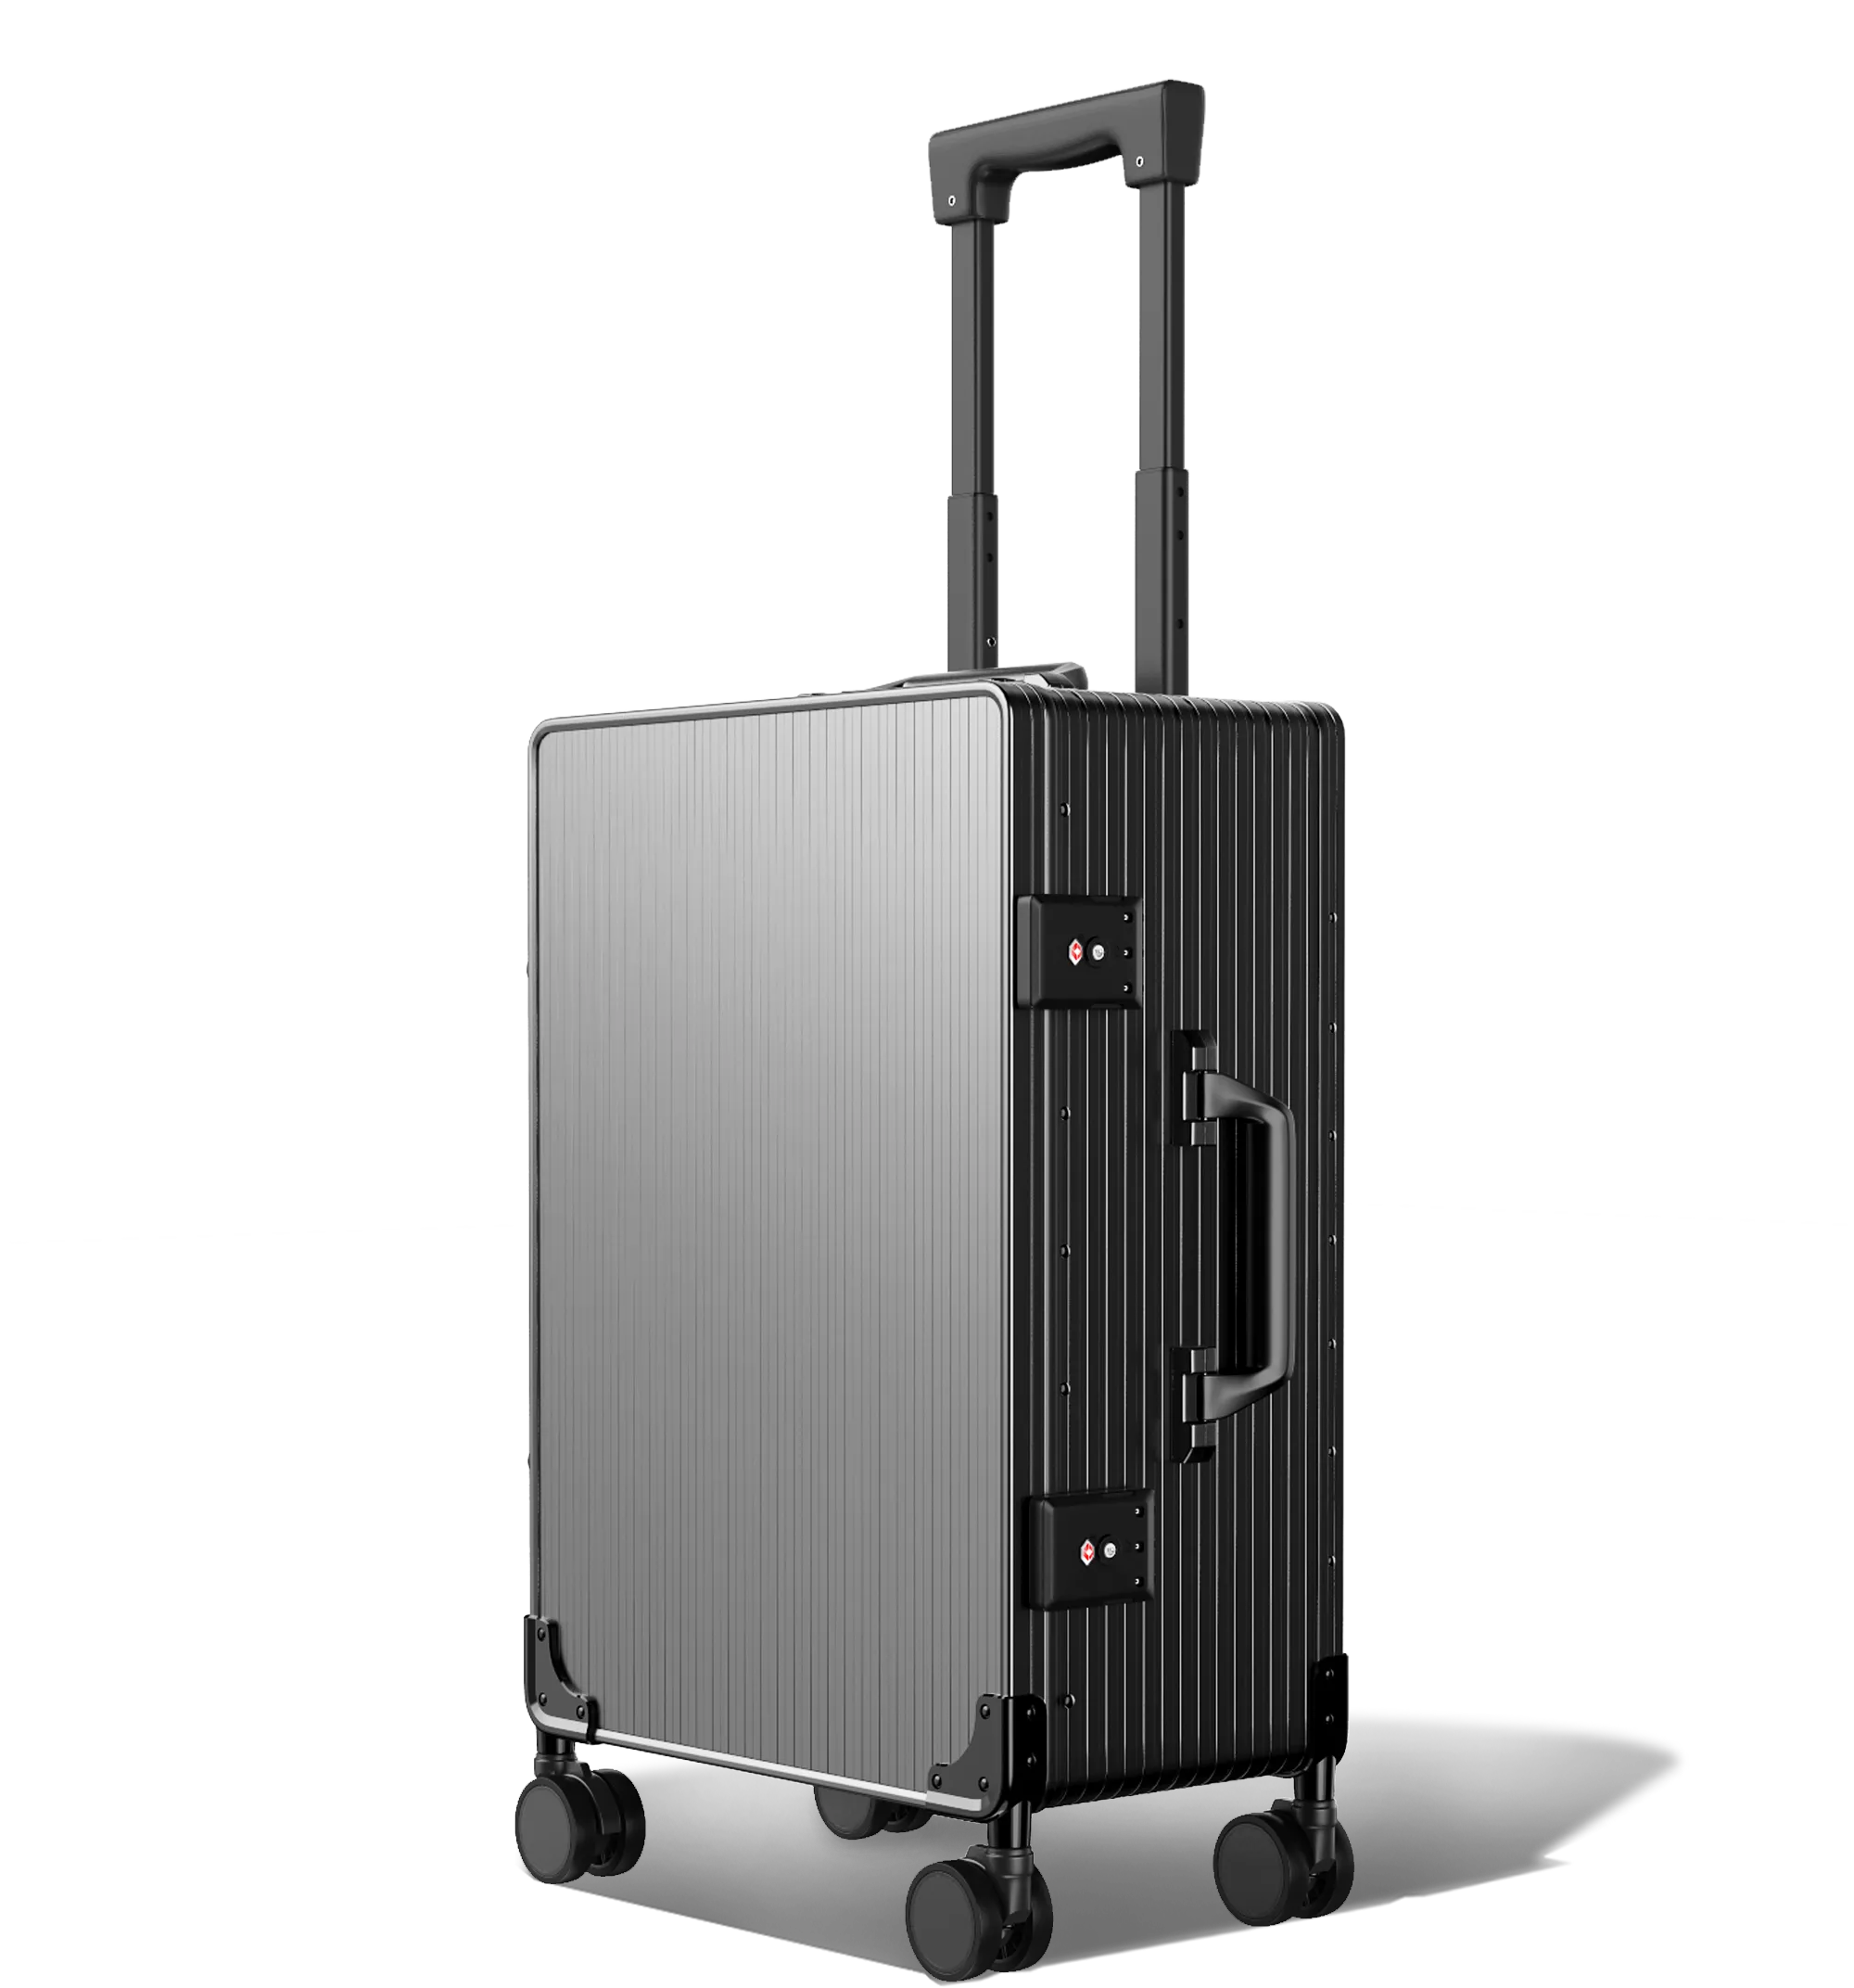 A three-quarter view of an upright Cabin in 56/20 black hard-shell aluminium Luggage with a textured surface, featuring an extended telescopic handle, a side handle, and four spinner wheels, set against a white background.